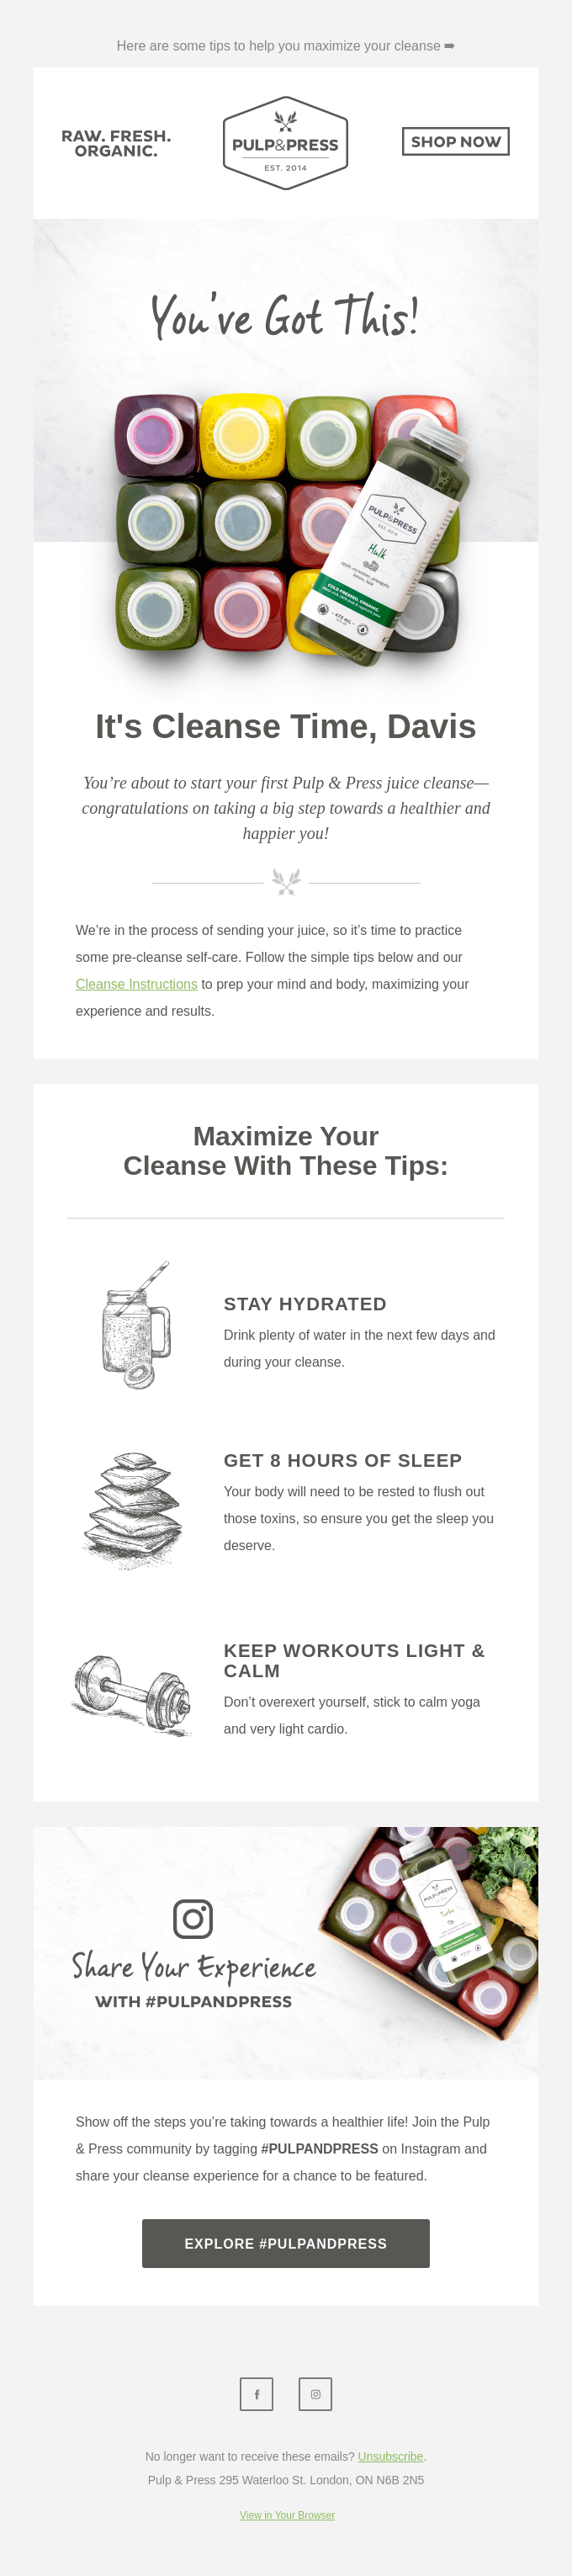 It's time to get cleanse-ready!